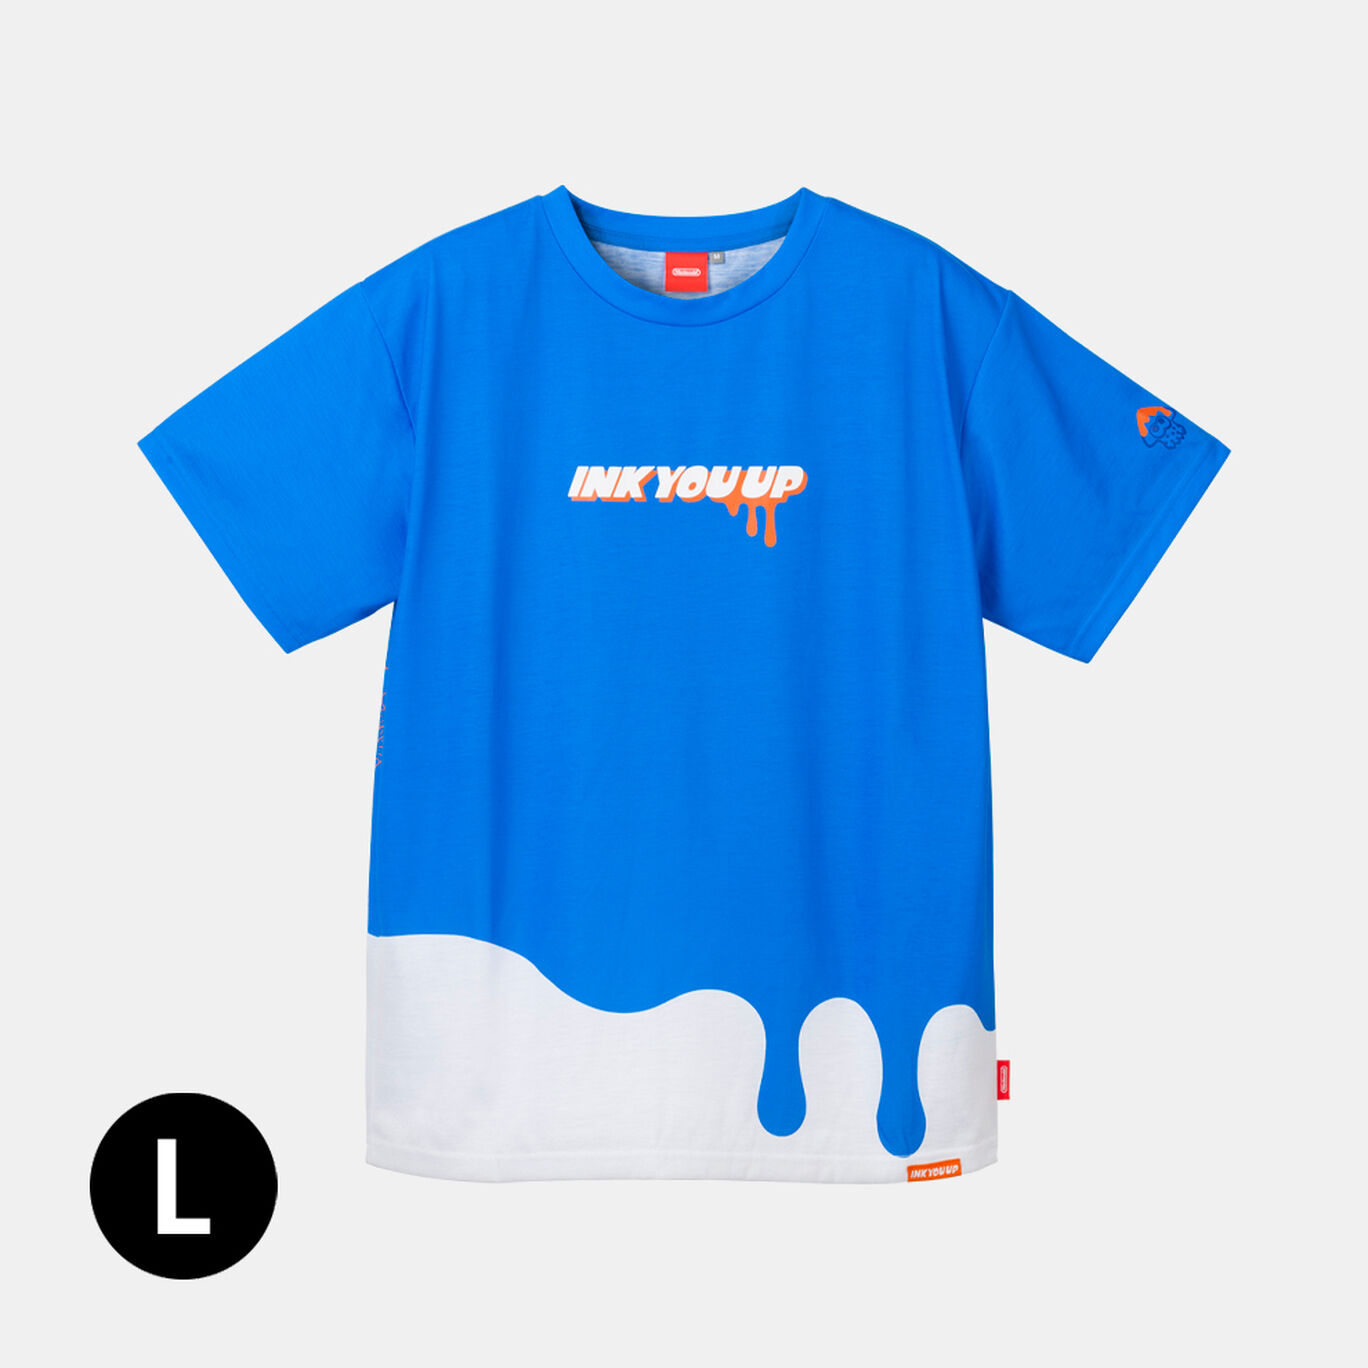 Tシャツ A L INK YOU UP【Nintendo TOKYO取り扱い商品】